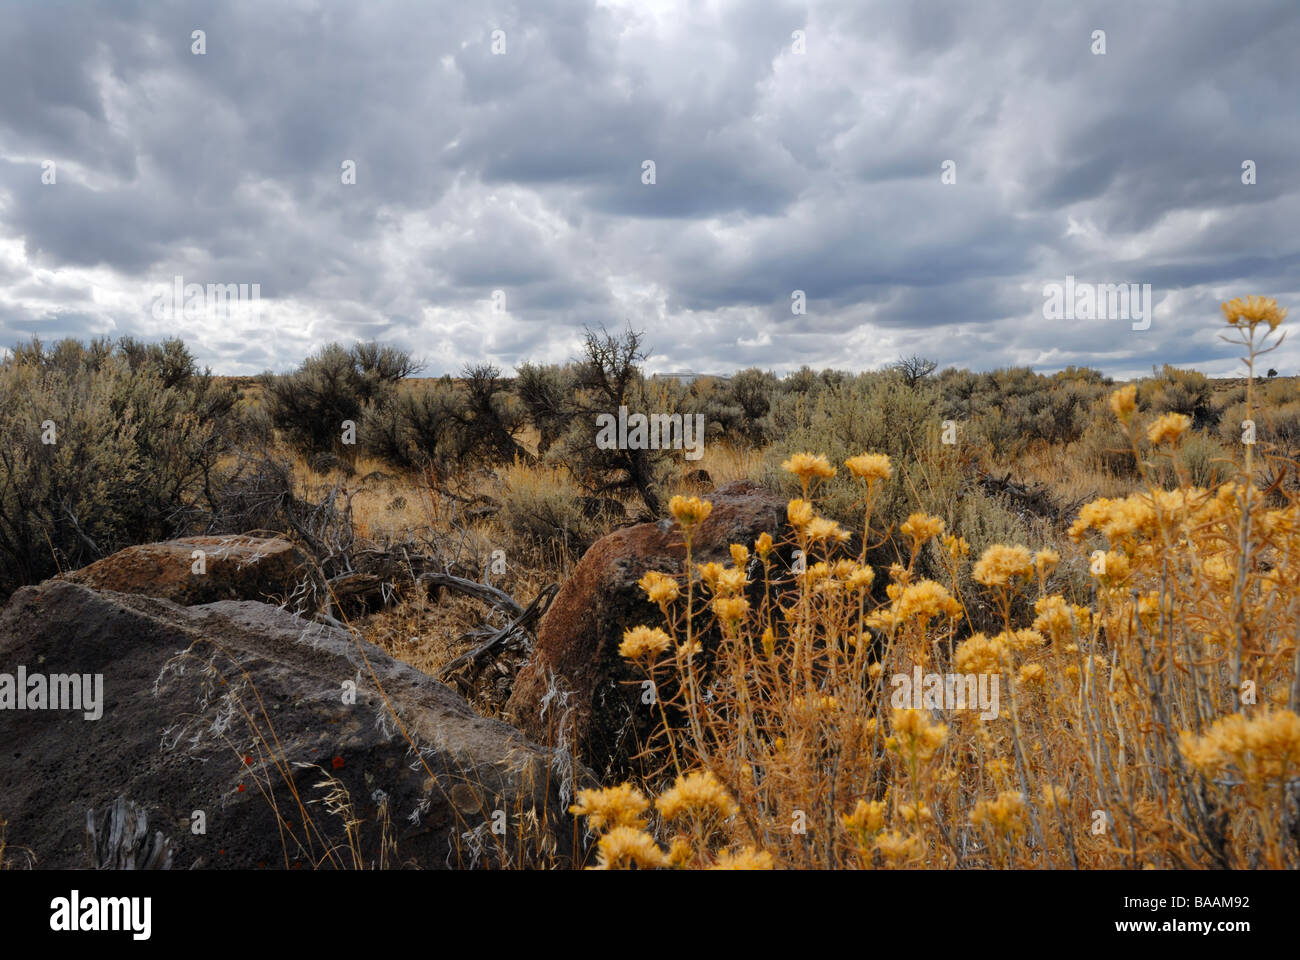 The state of Oregon's high desert countryside with sagebrush, Artemisia tridentata, in bloom, with storm clouds. USA. Stock Photo